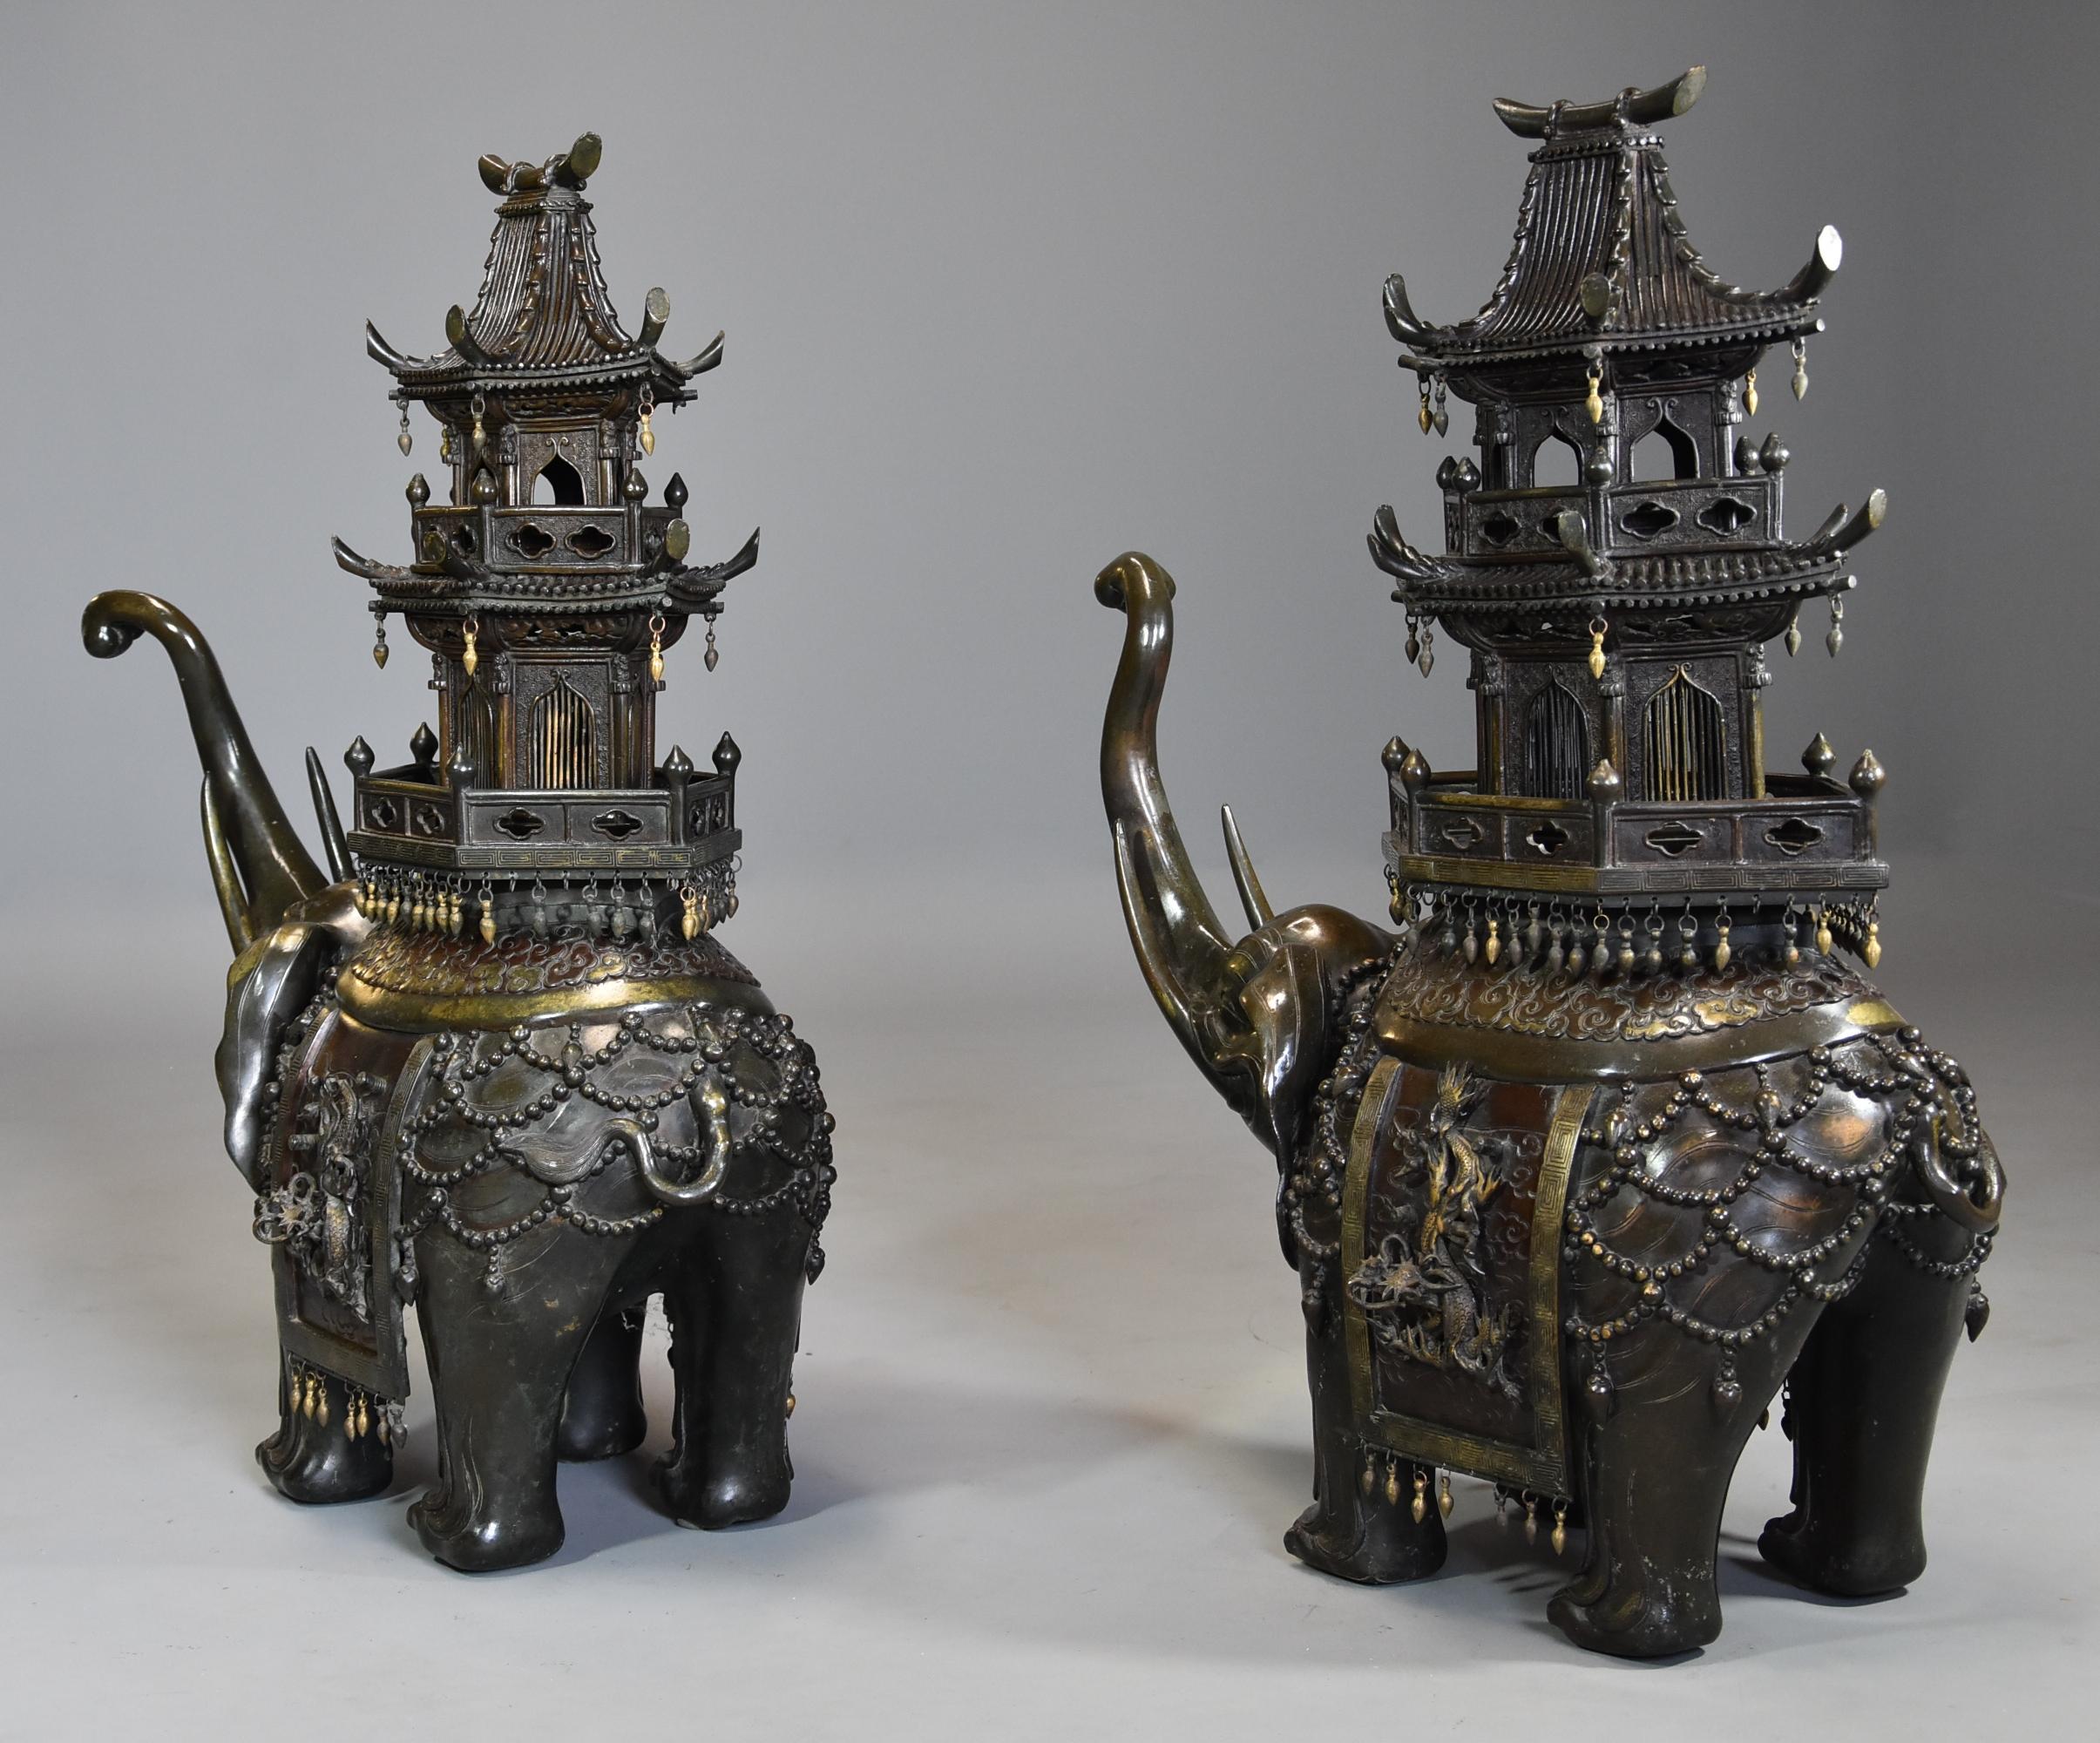 Pair of Large 19th Century Japanese Meiji Bronze Elephant Incense Burners For Sale 11